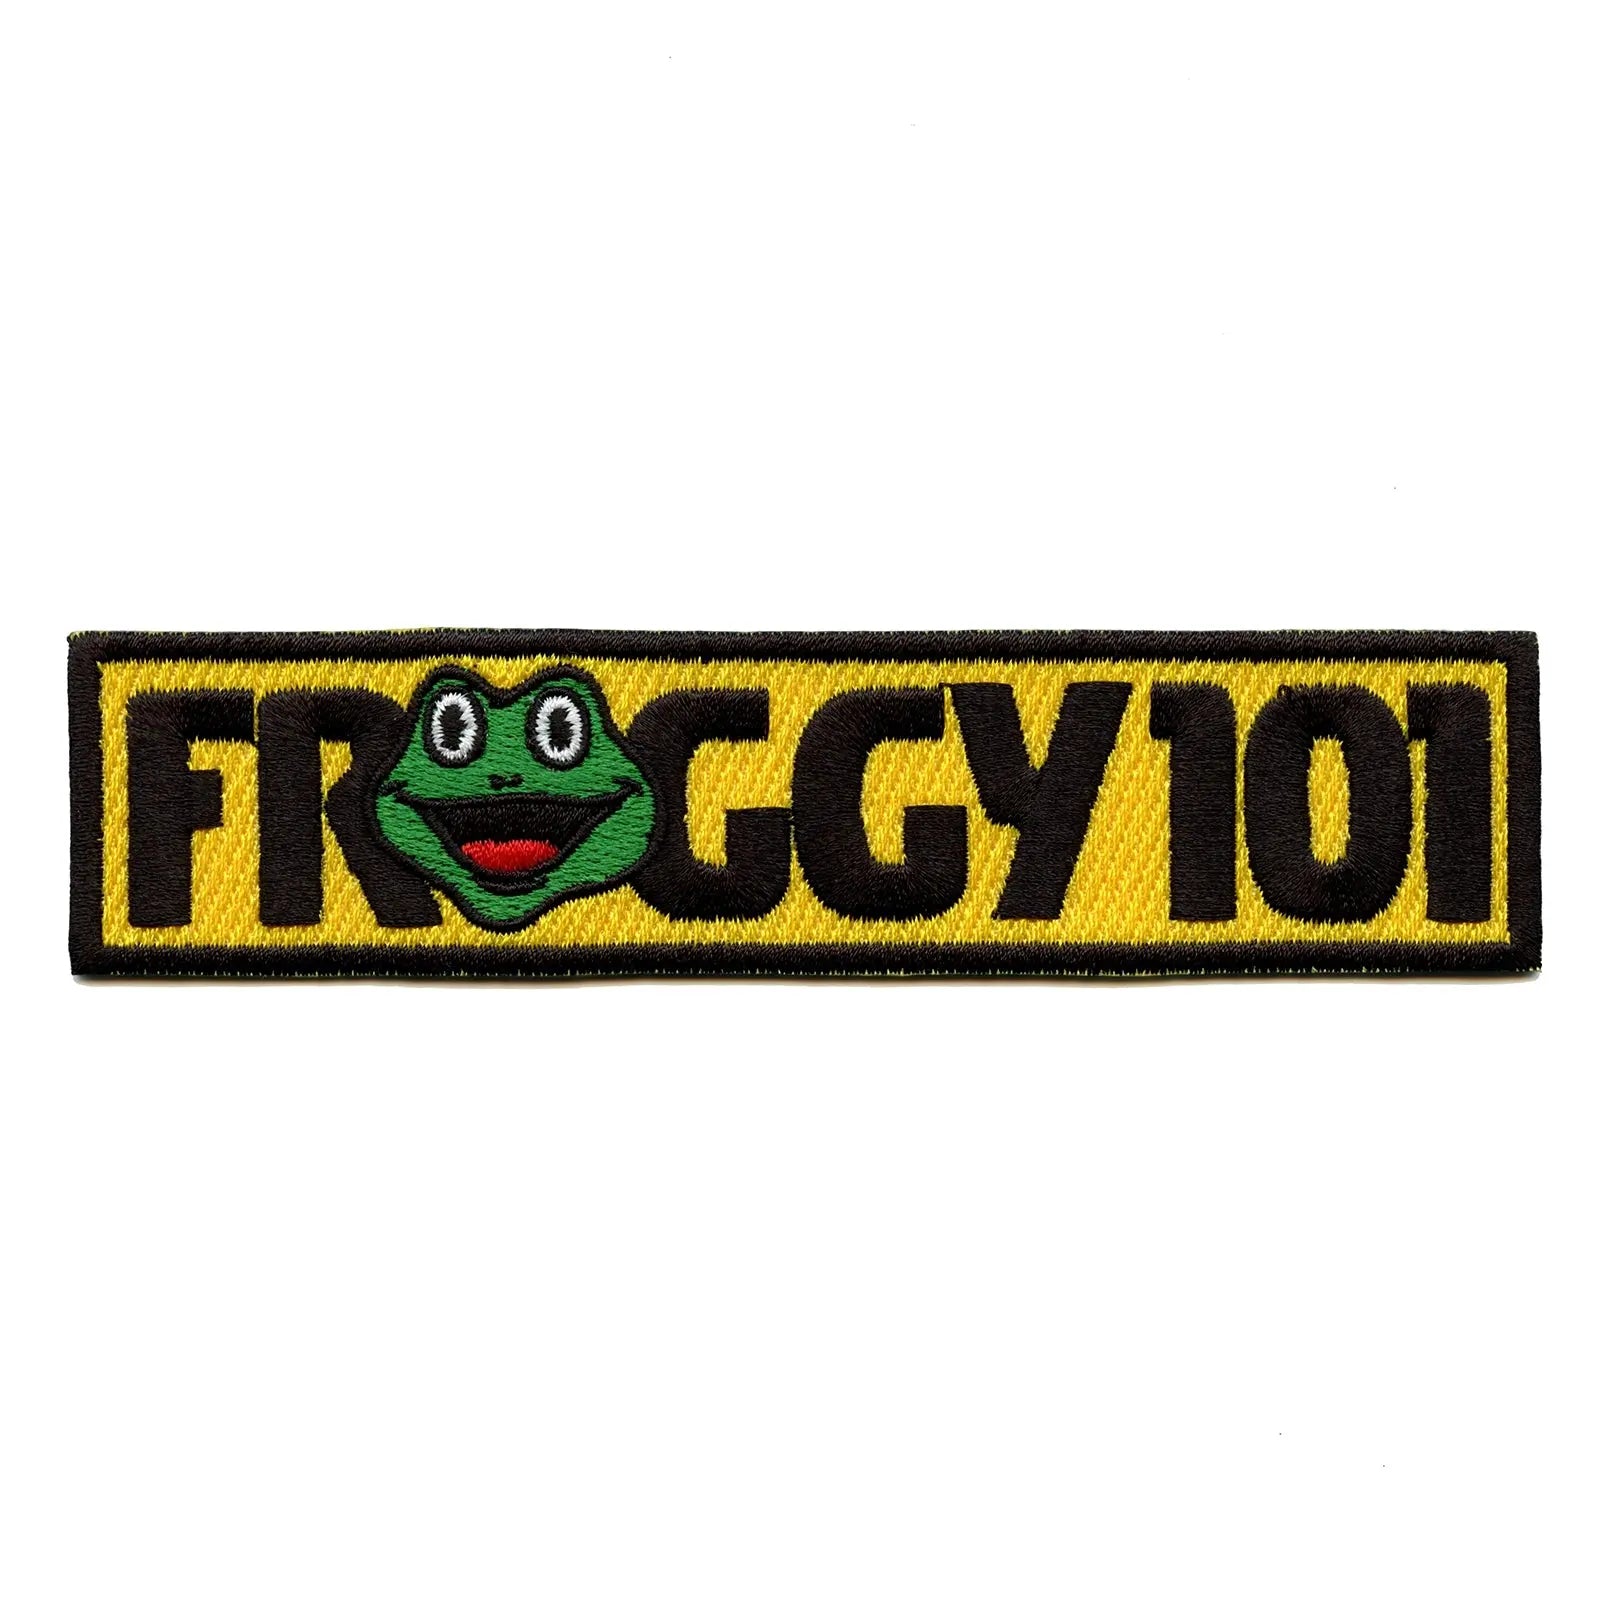 Froggy 101 Paper Company Logo Embroidered Iron On Patch 